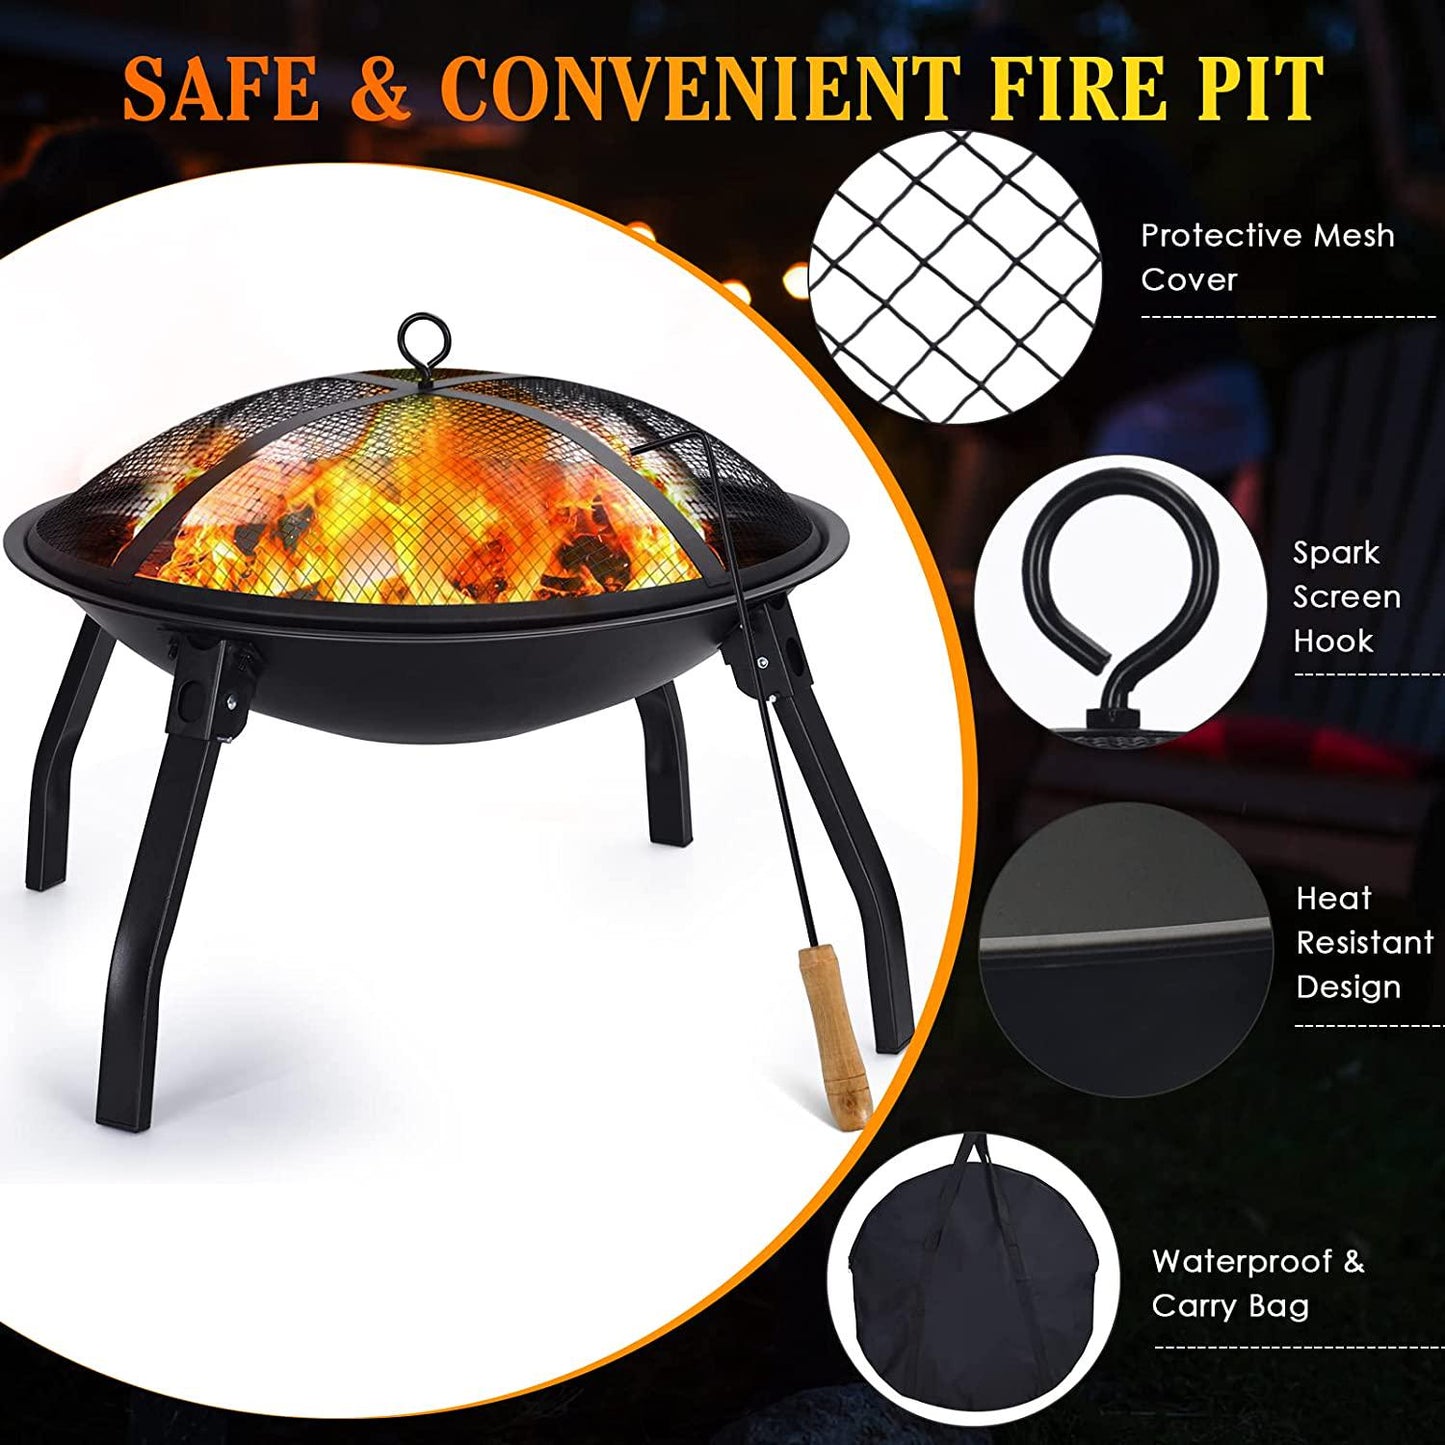 22 in Fire Pit, Wood Burning Folding Firepit with Carry Bag Spark Screen and Poker Stick, 2 Pack Grill, 4 Folding Legs for Fire Pits for Outside, Camping, Picnic, Backyard, BBQ, Electric